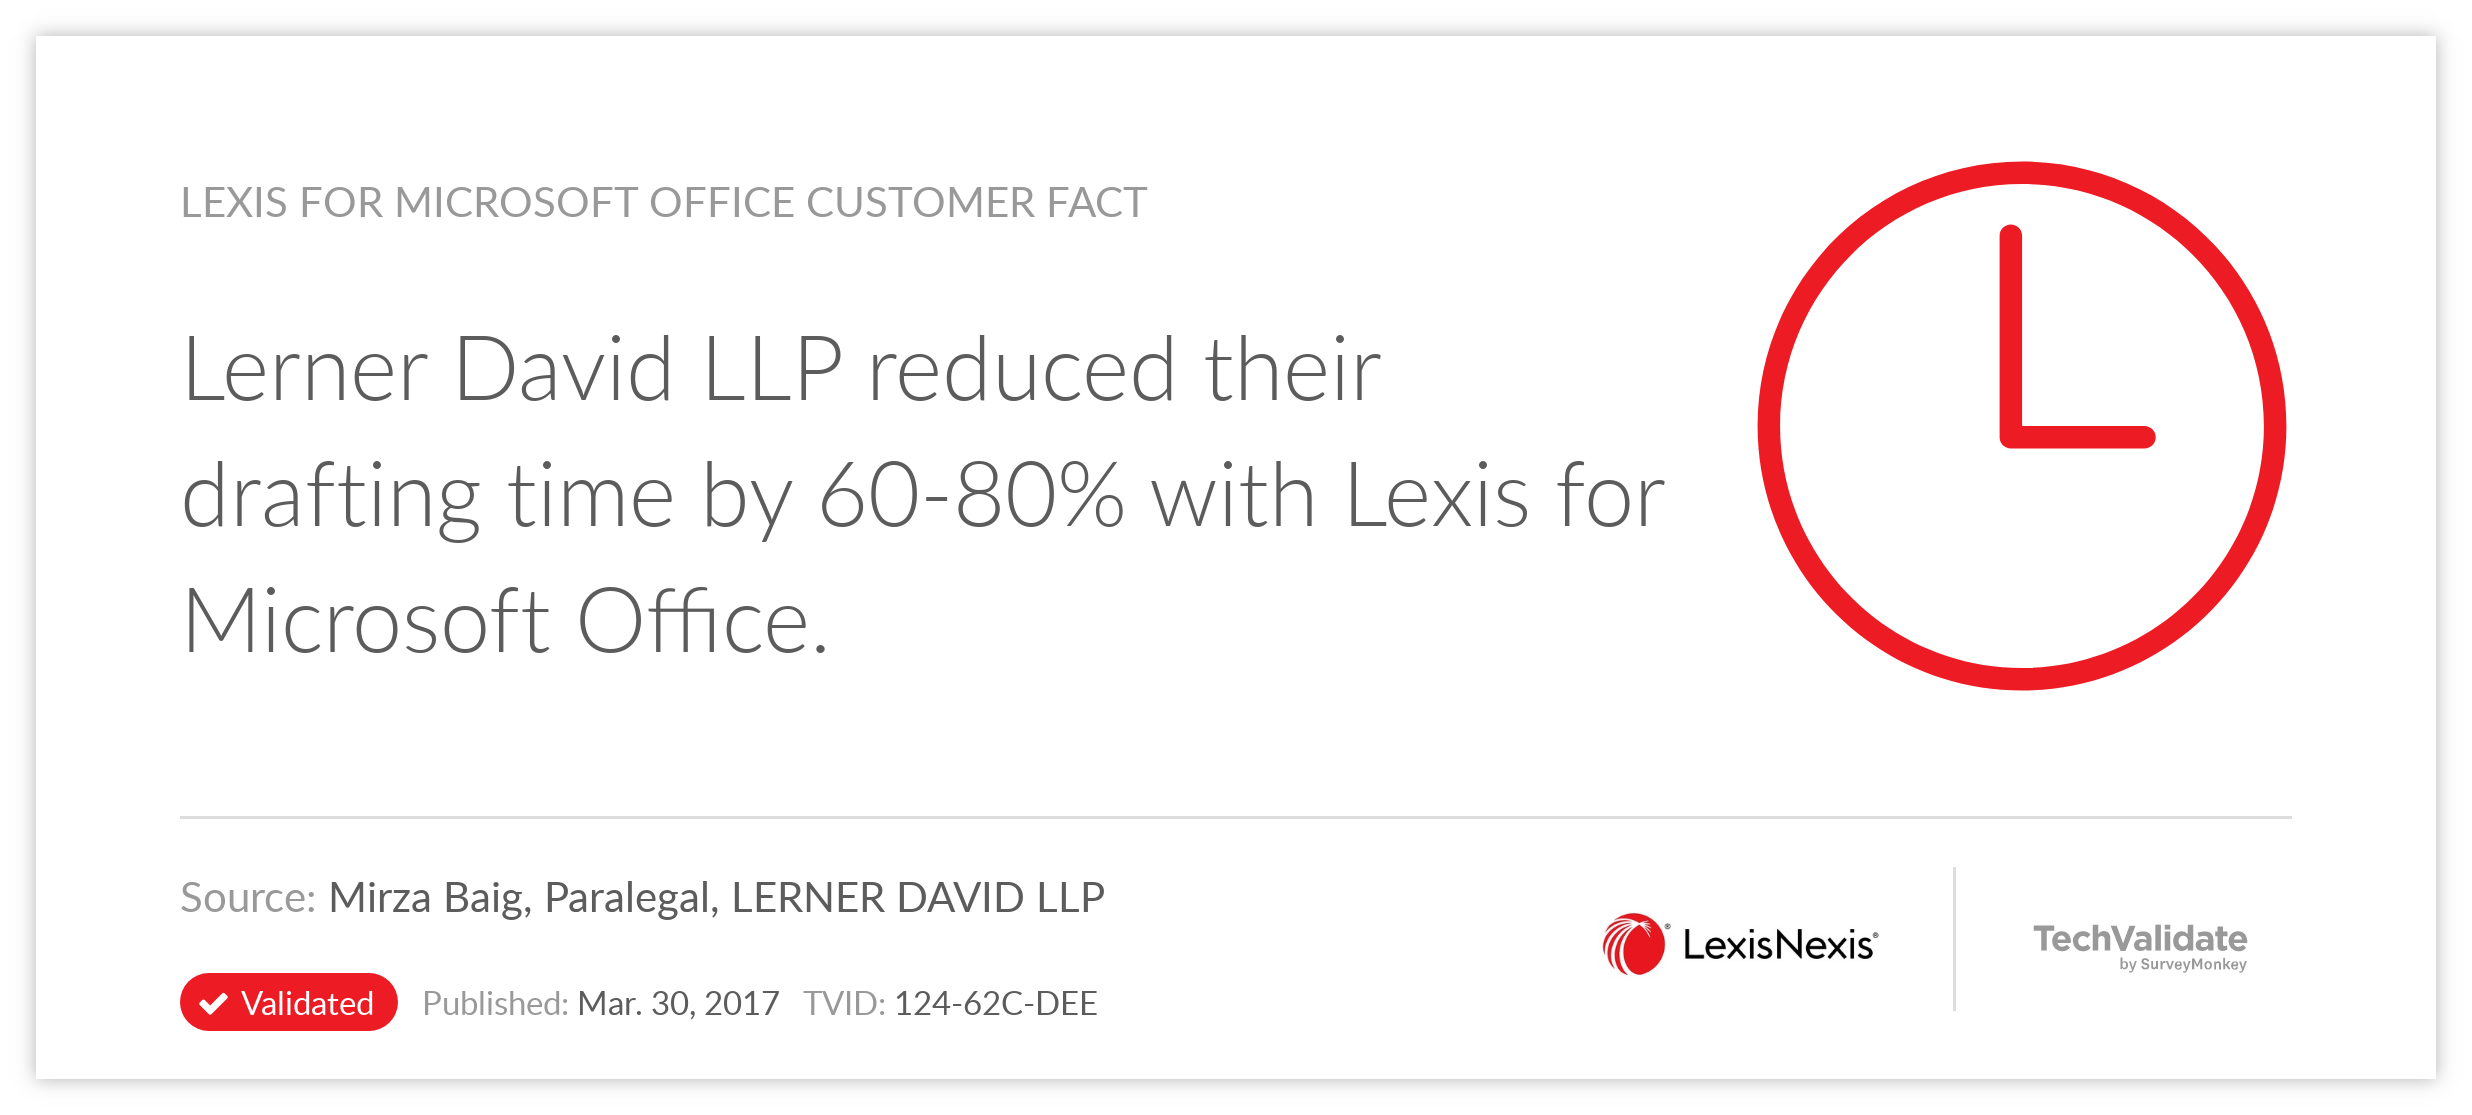 Lexis for Microsoft Office Customer Fact